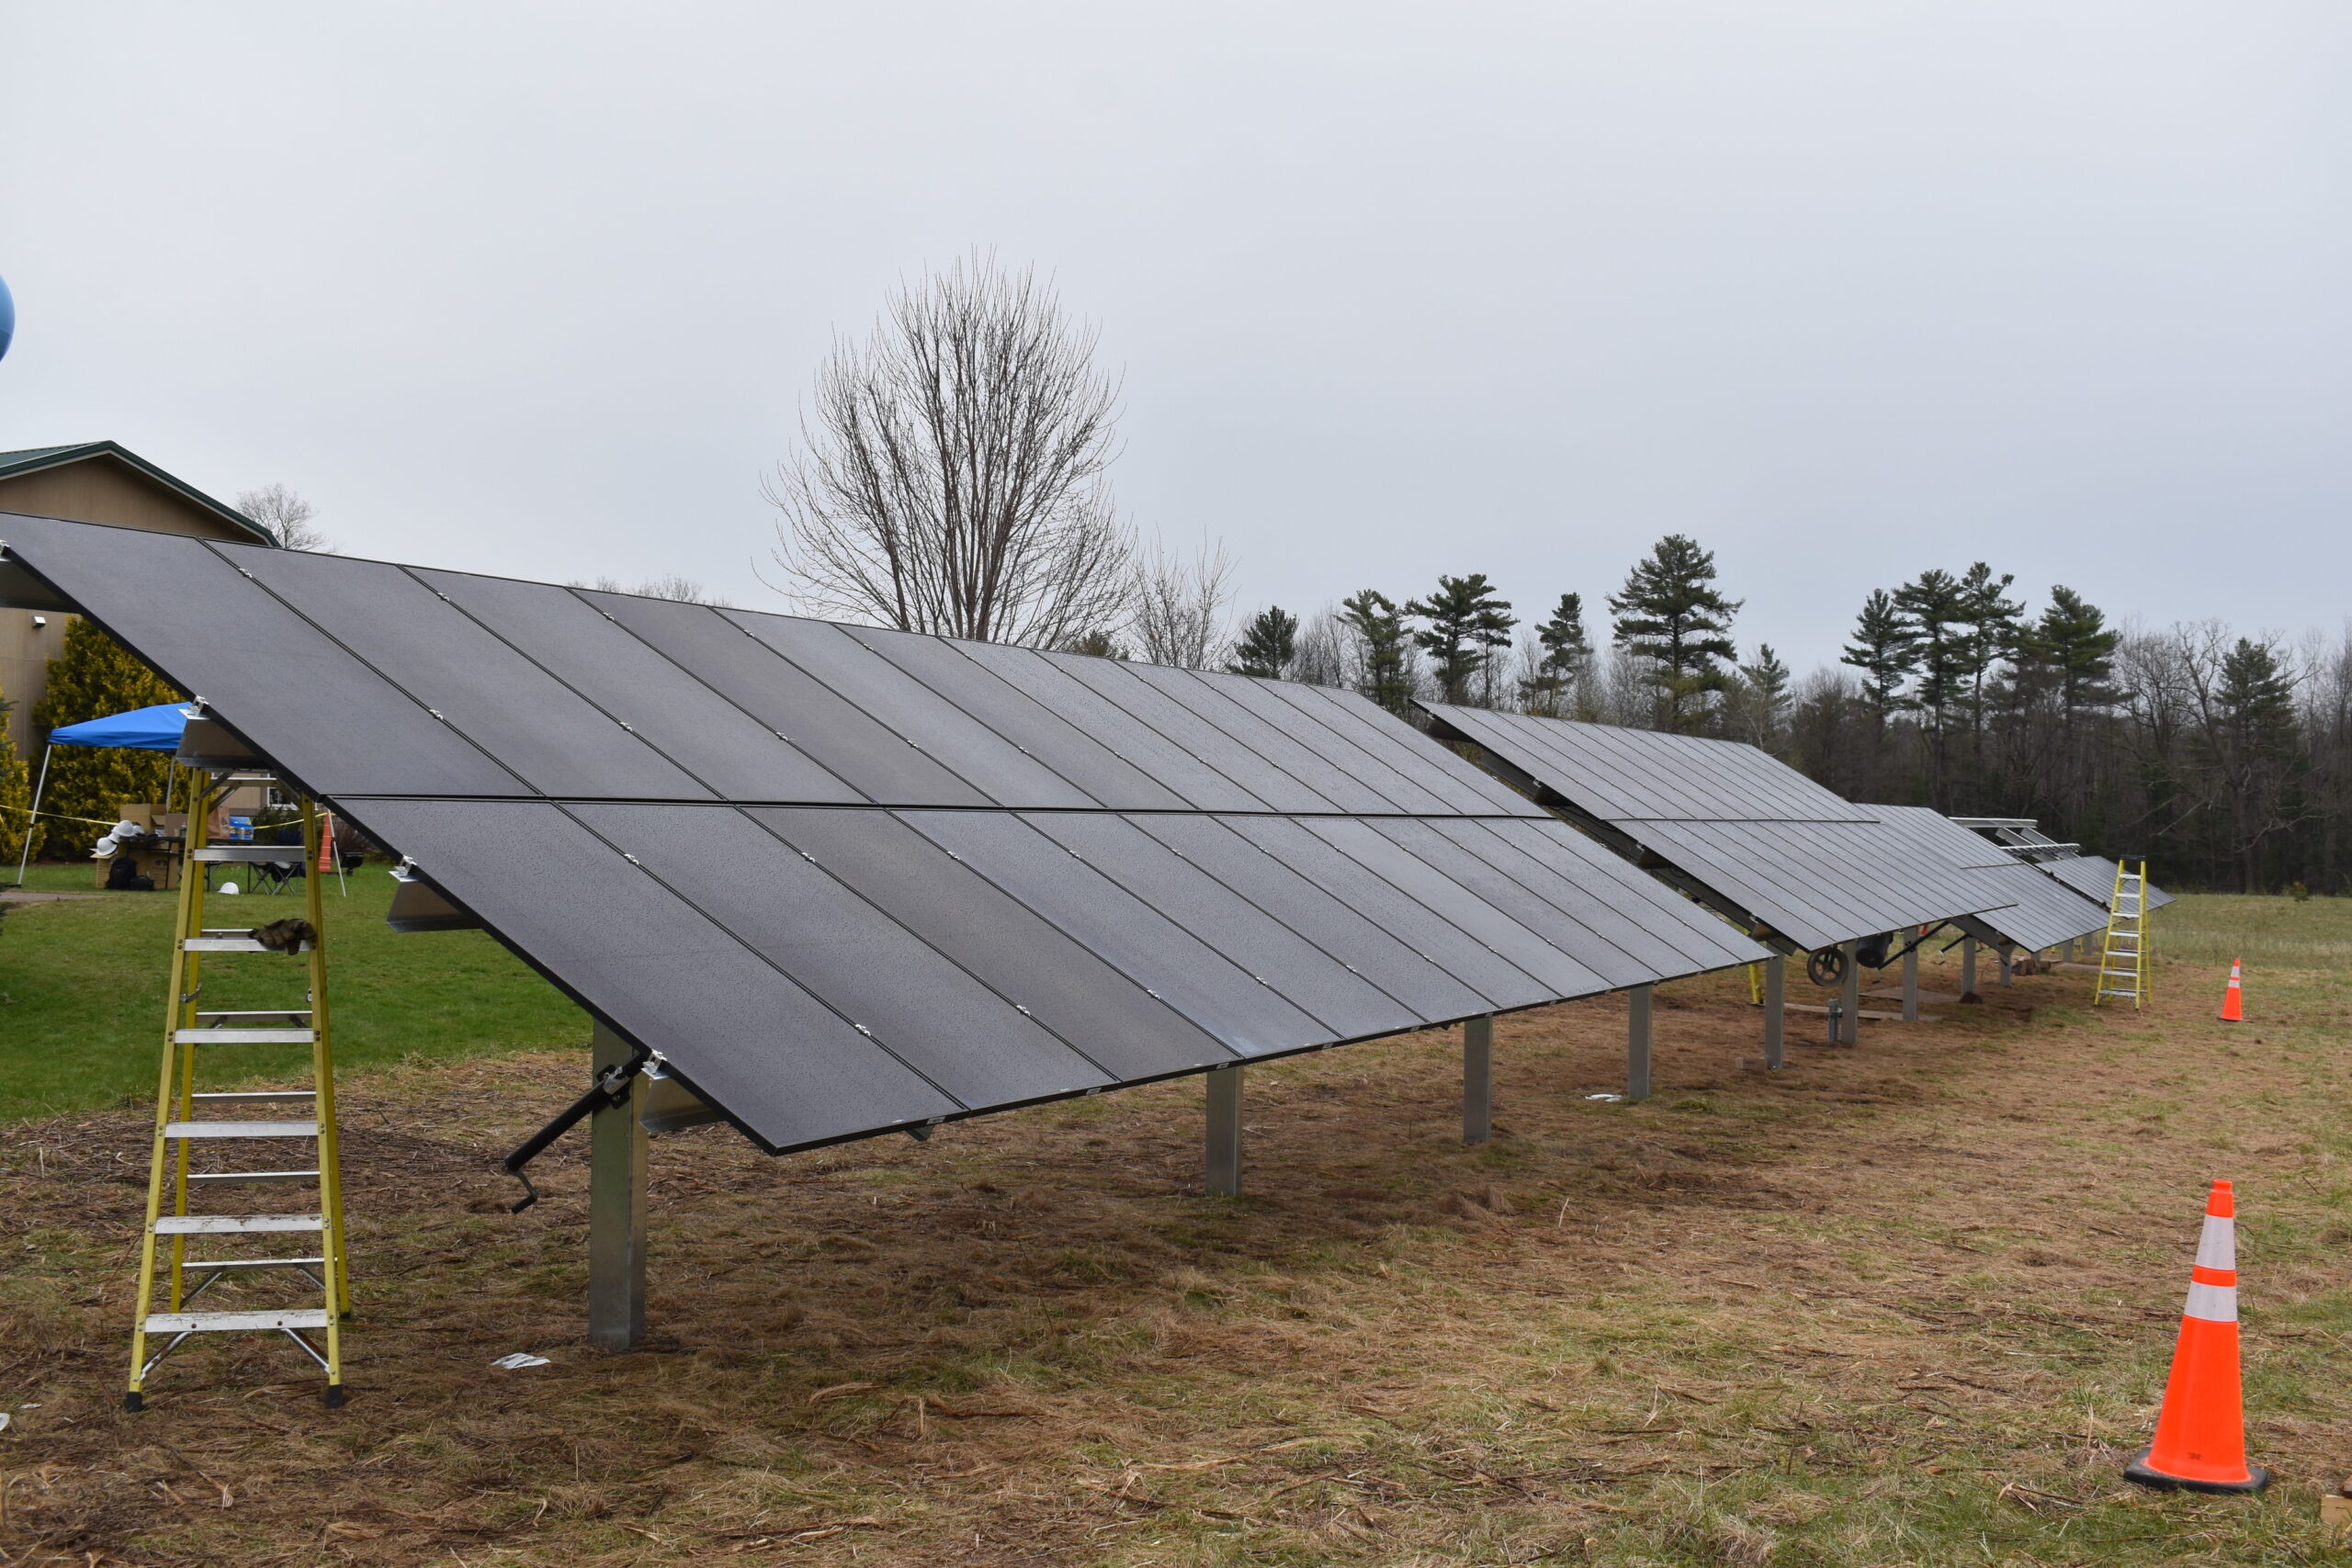 This solar array generates enough energy to power the College of Menominee Nation's Sustainable Development Institute building and put energy back into the grid.